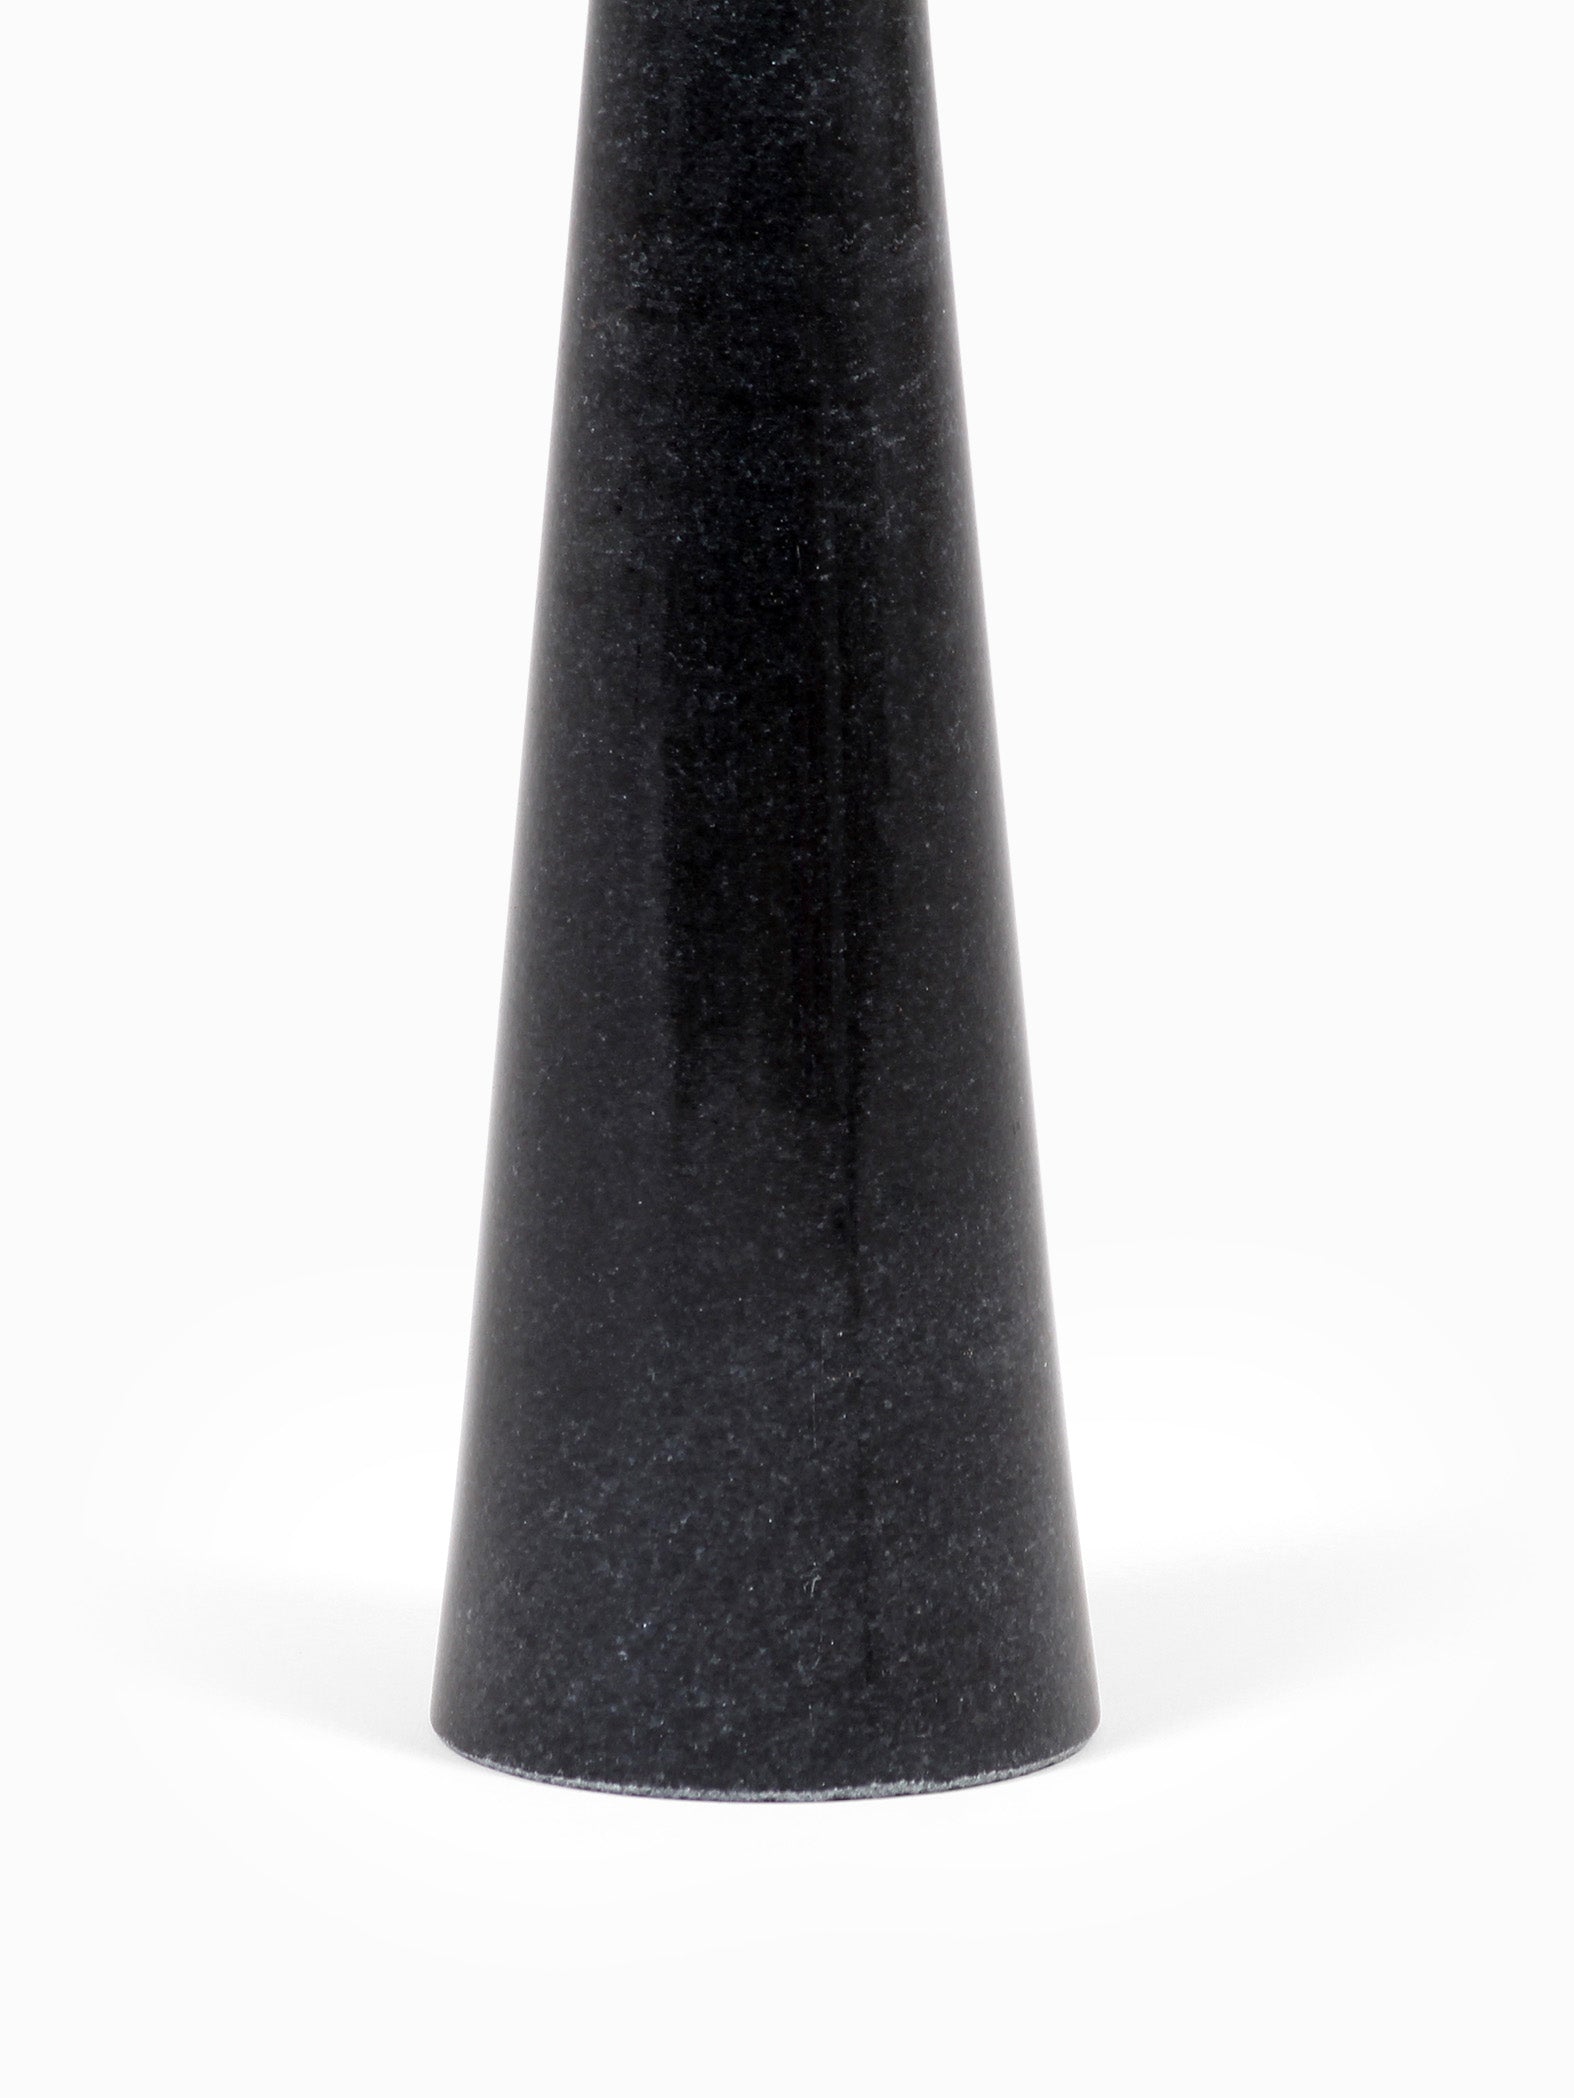 Black Candle Stand Small